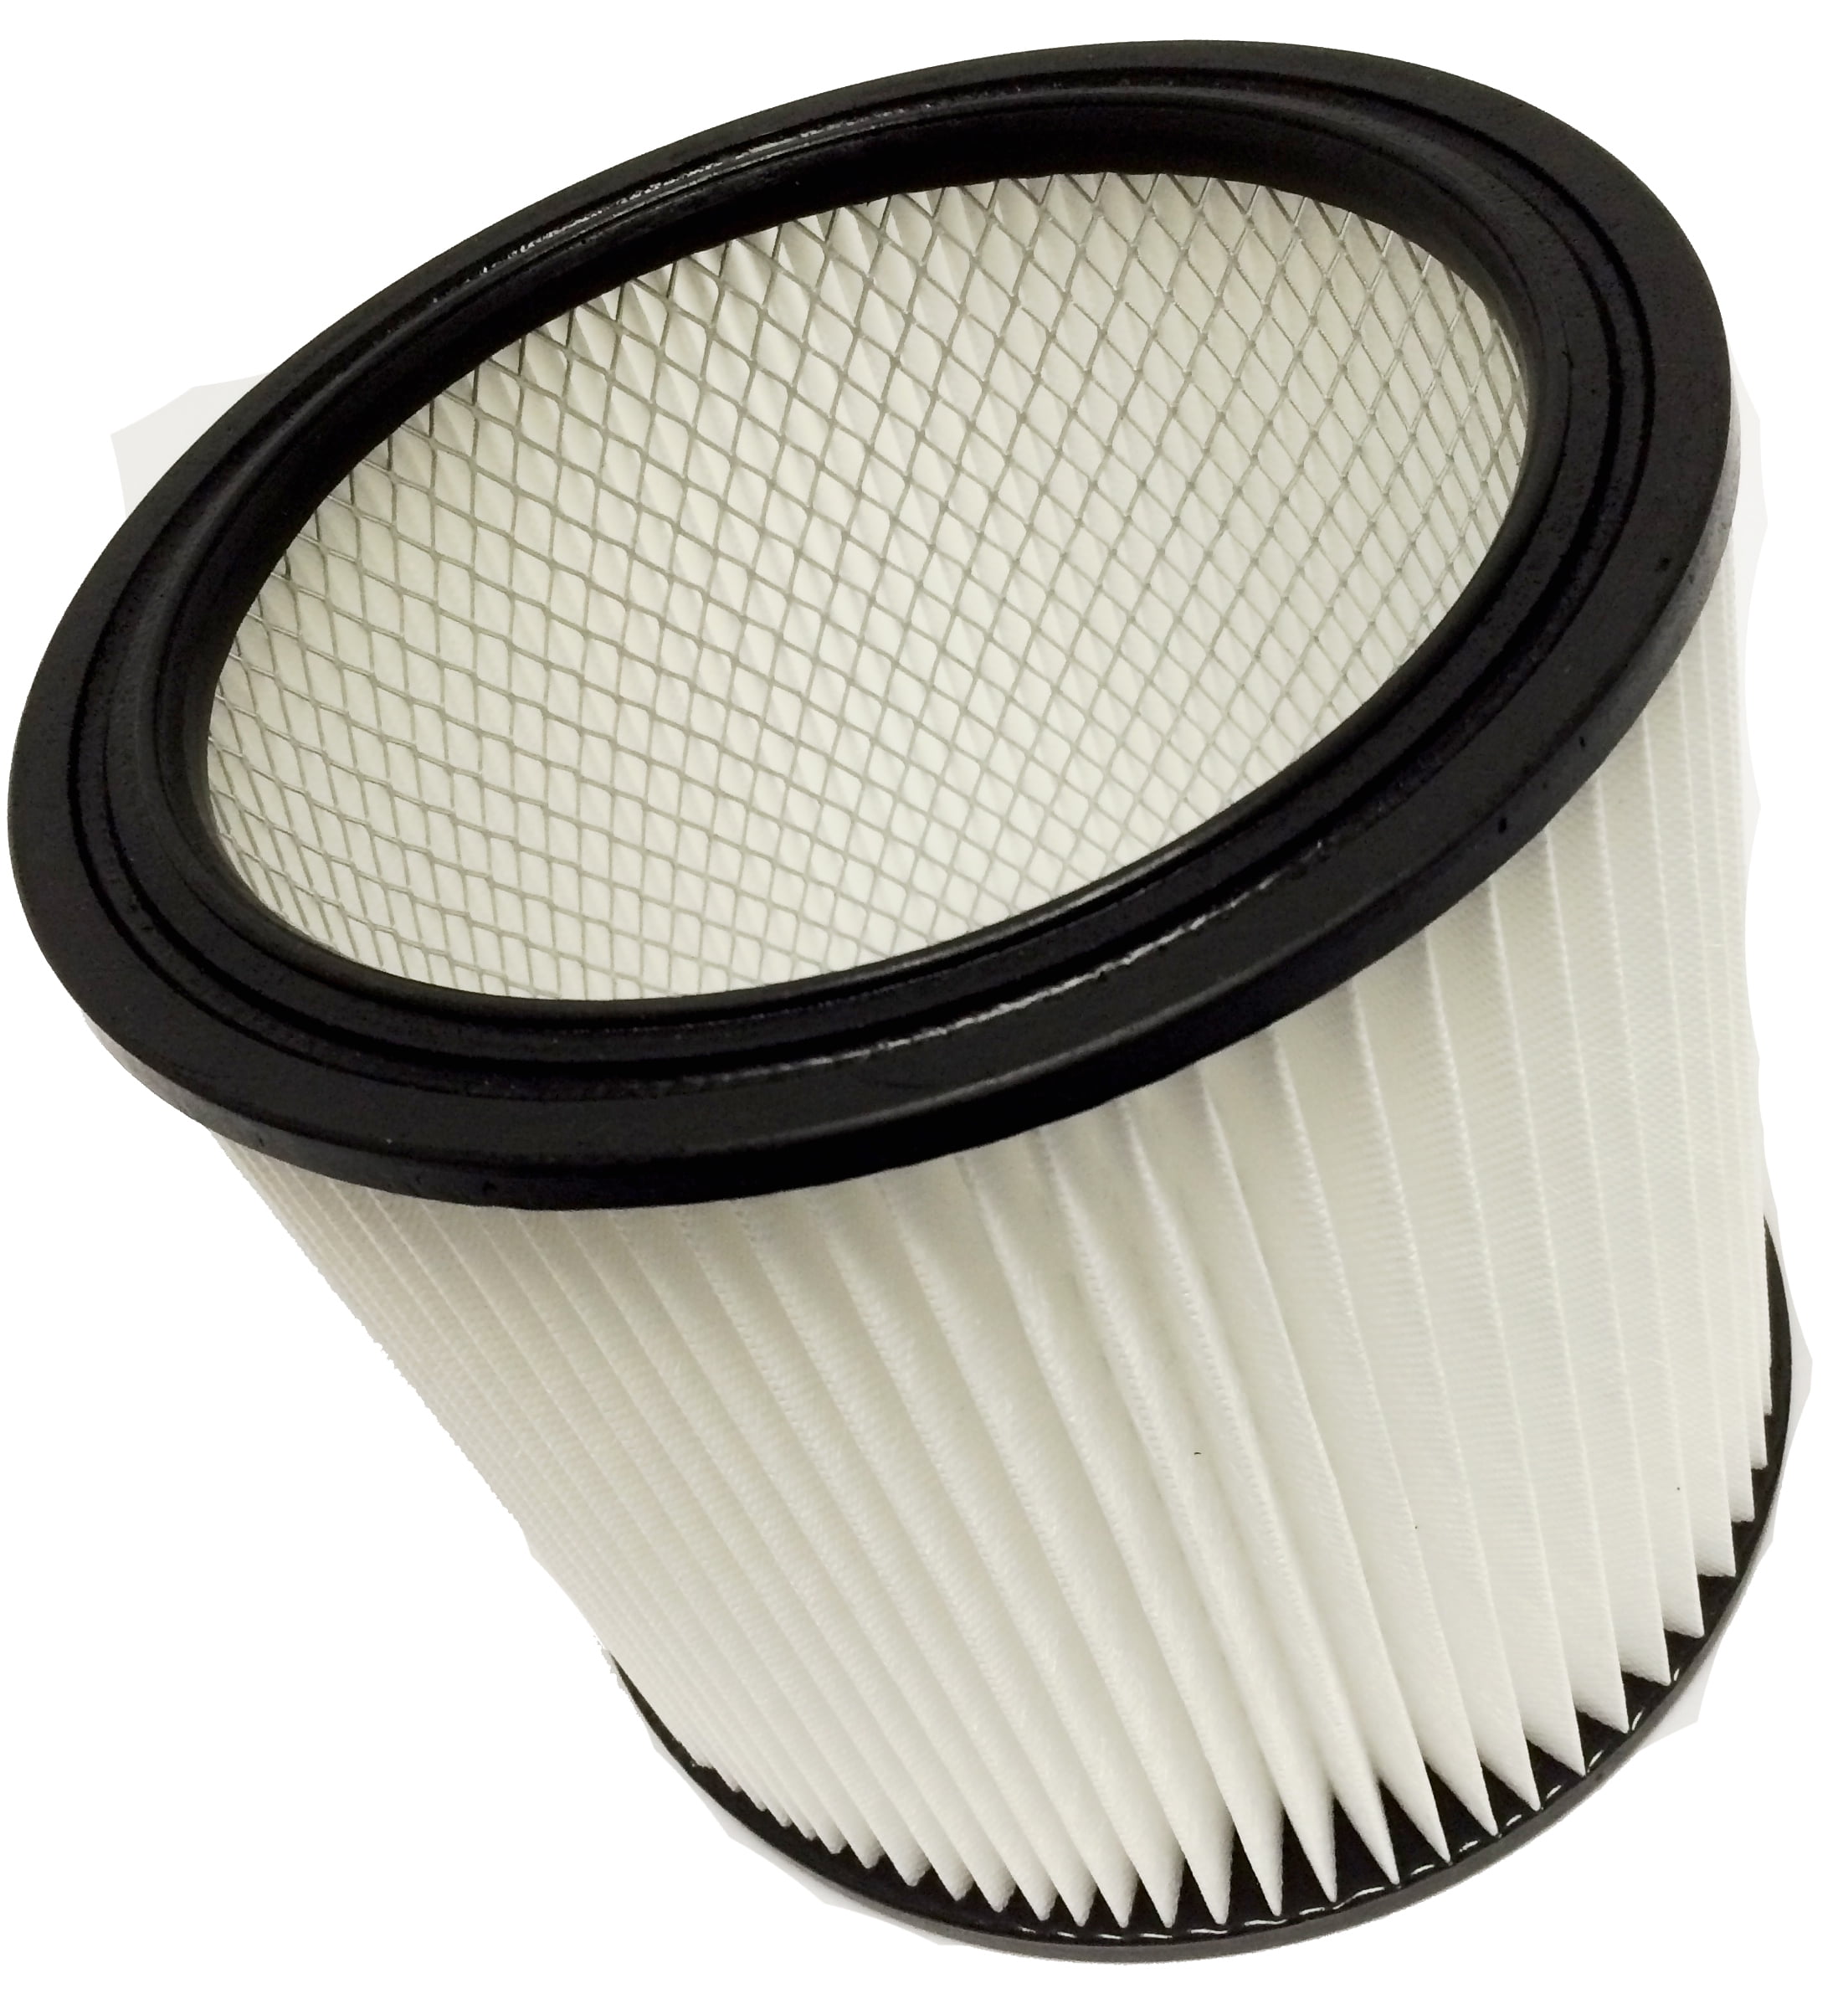 903-04 Wet Dry Filter Cartridge for Shop Vac 9030400 90304 903-04-00 